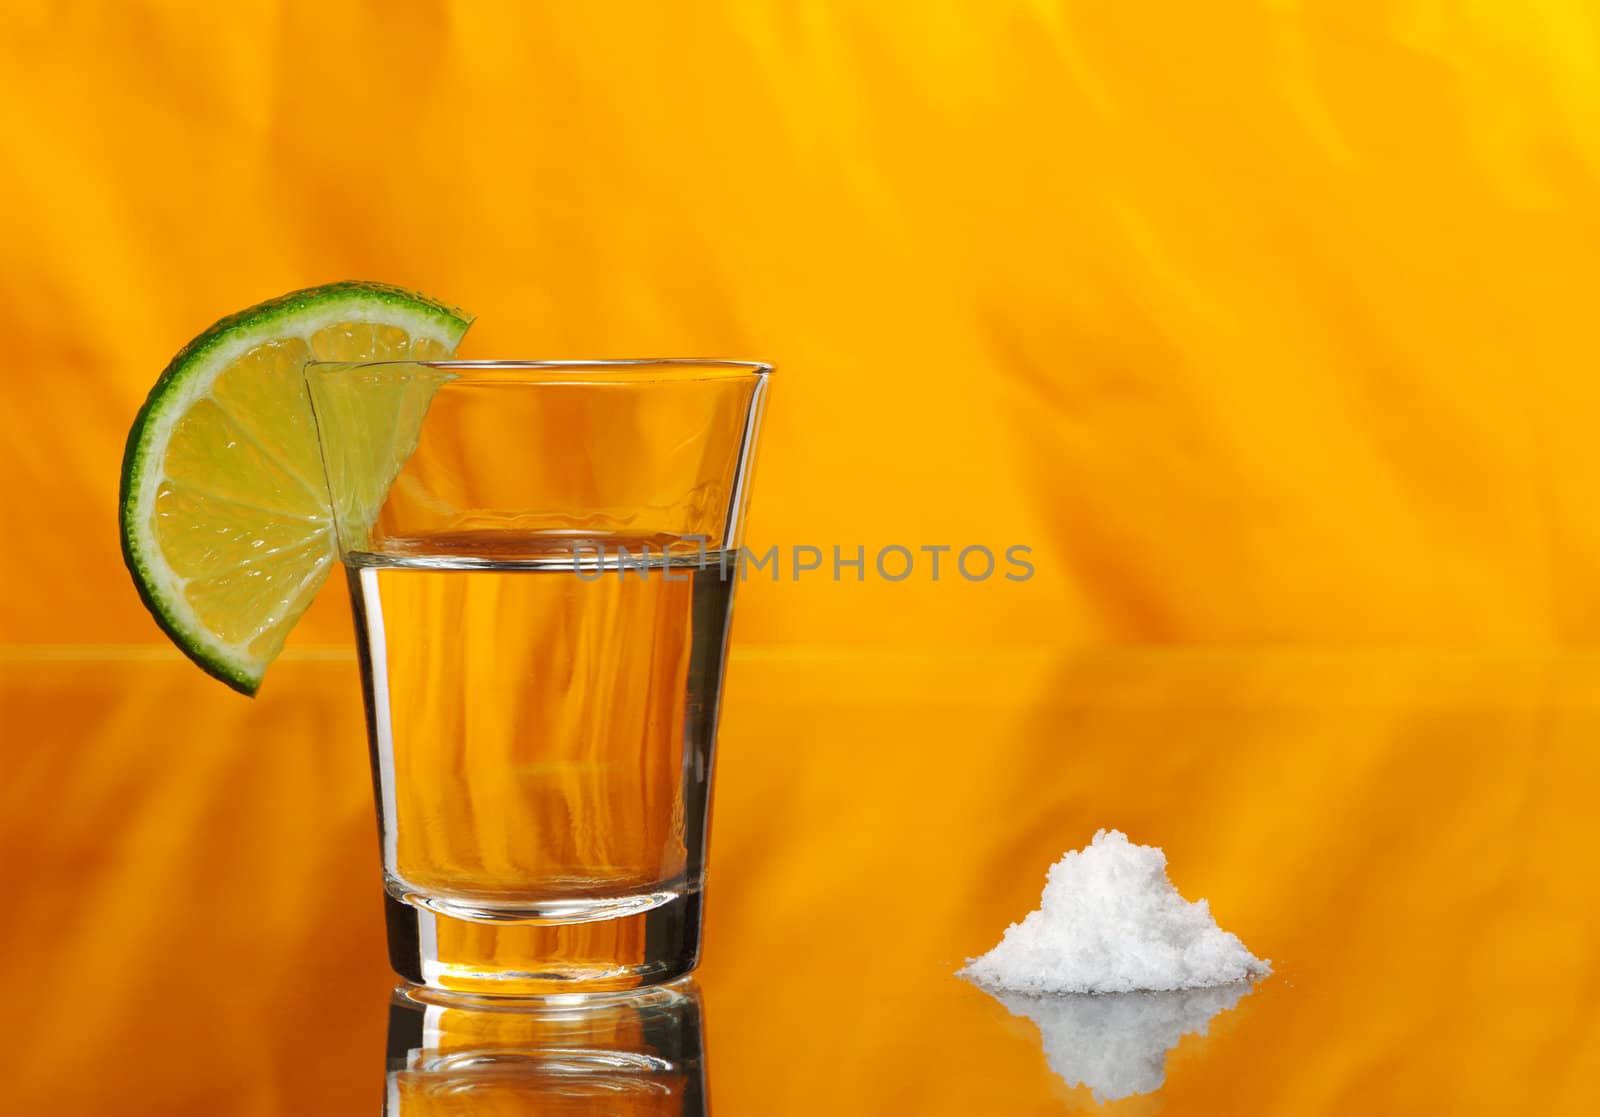 Tequila shot with a half a slice of lime on the glass and a pile of salt by the side on orange background (Selective Focus)